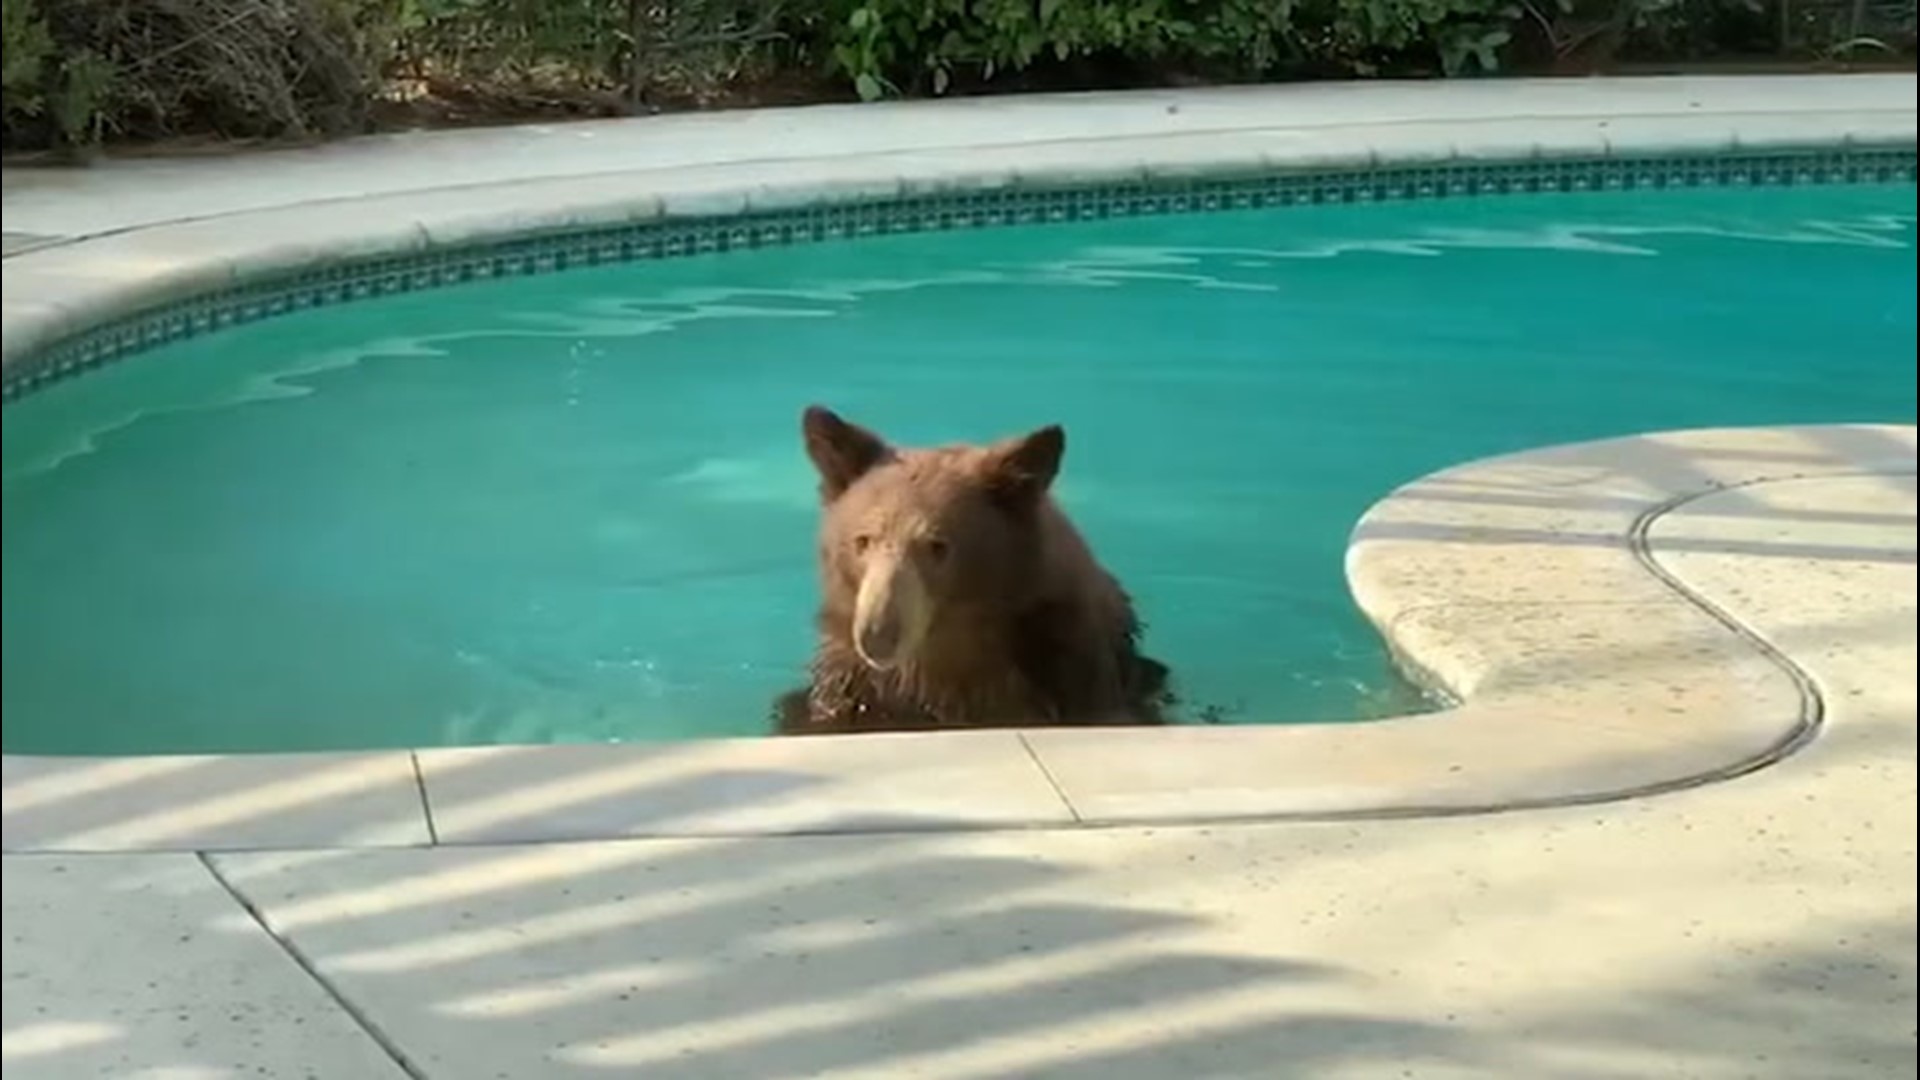 Bear takes dip in swimming pool to cool off